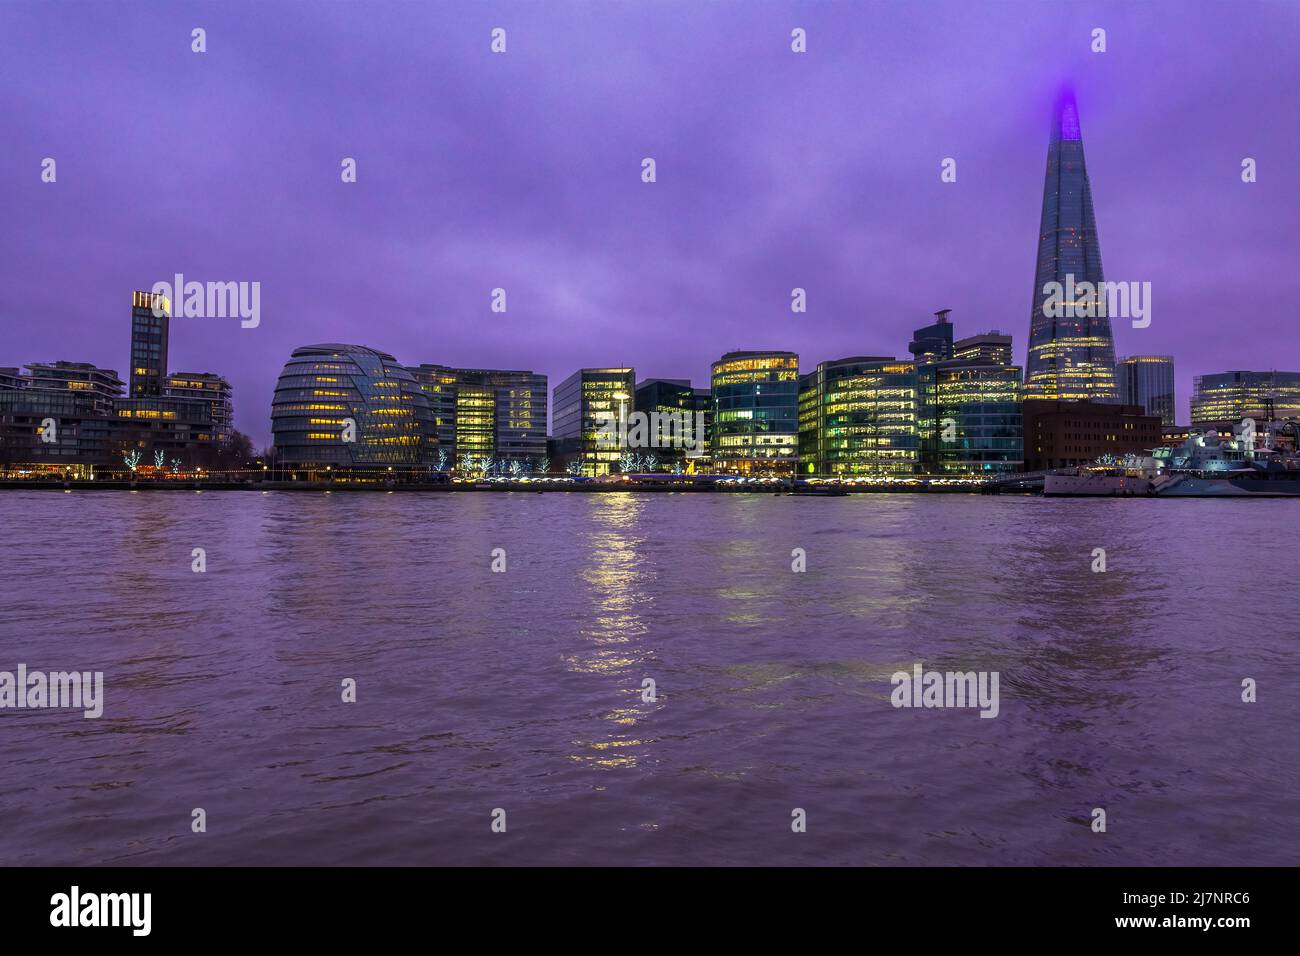 The London South Bank skyline including the Shard at night Stock Photo